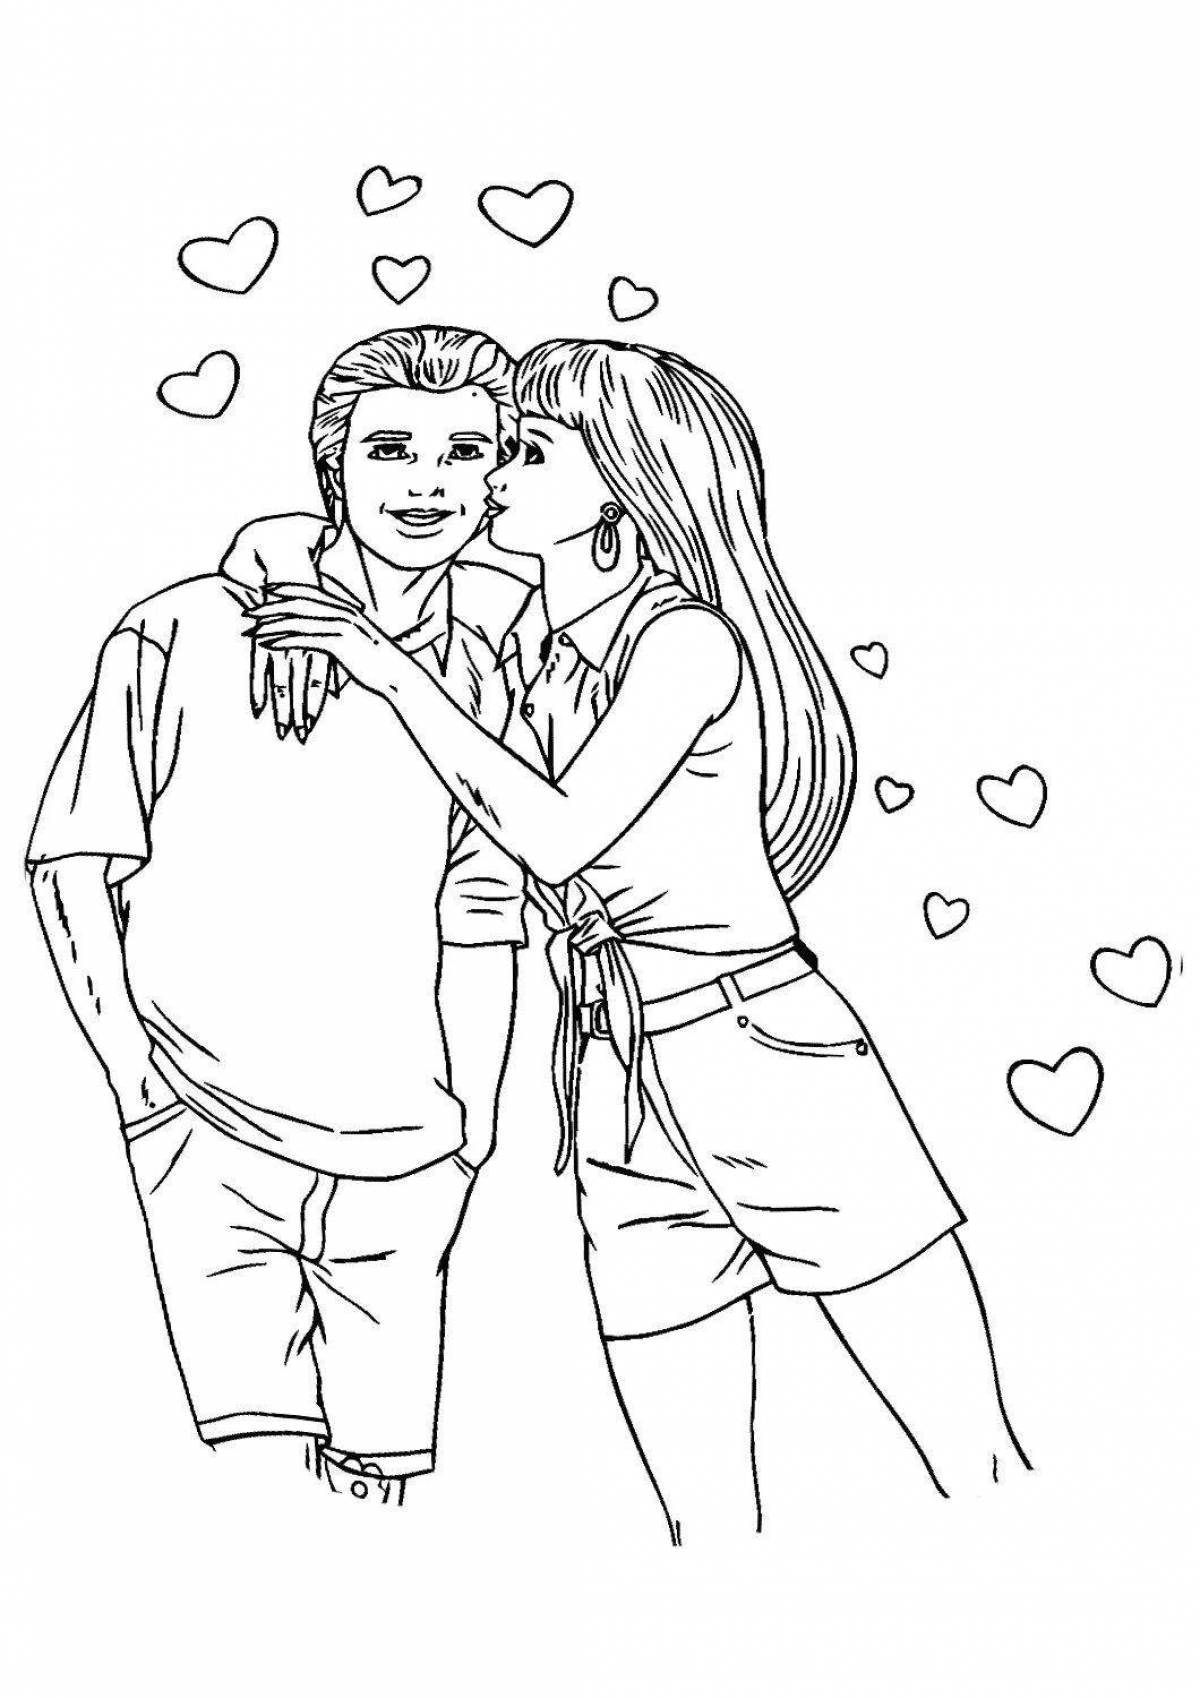 Coloring page boy and girl in high spirits